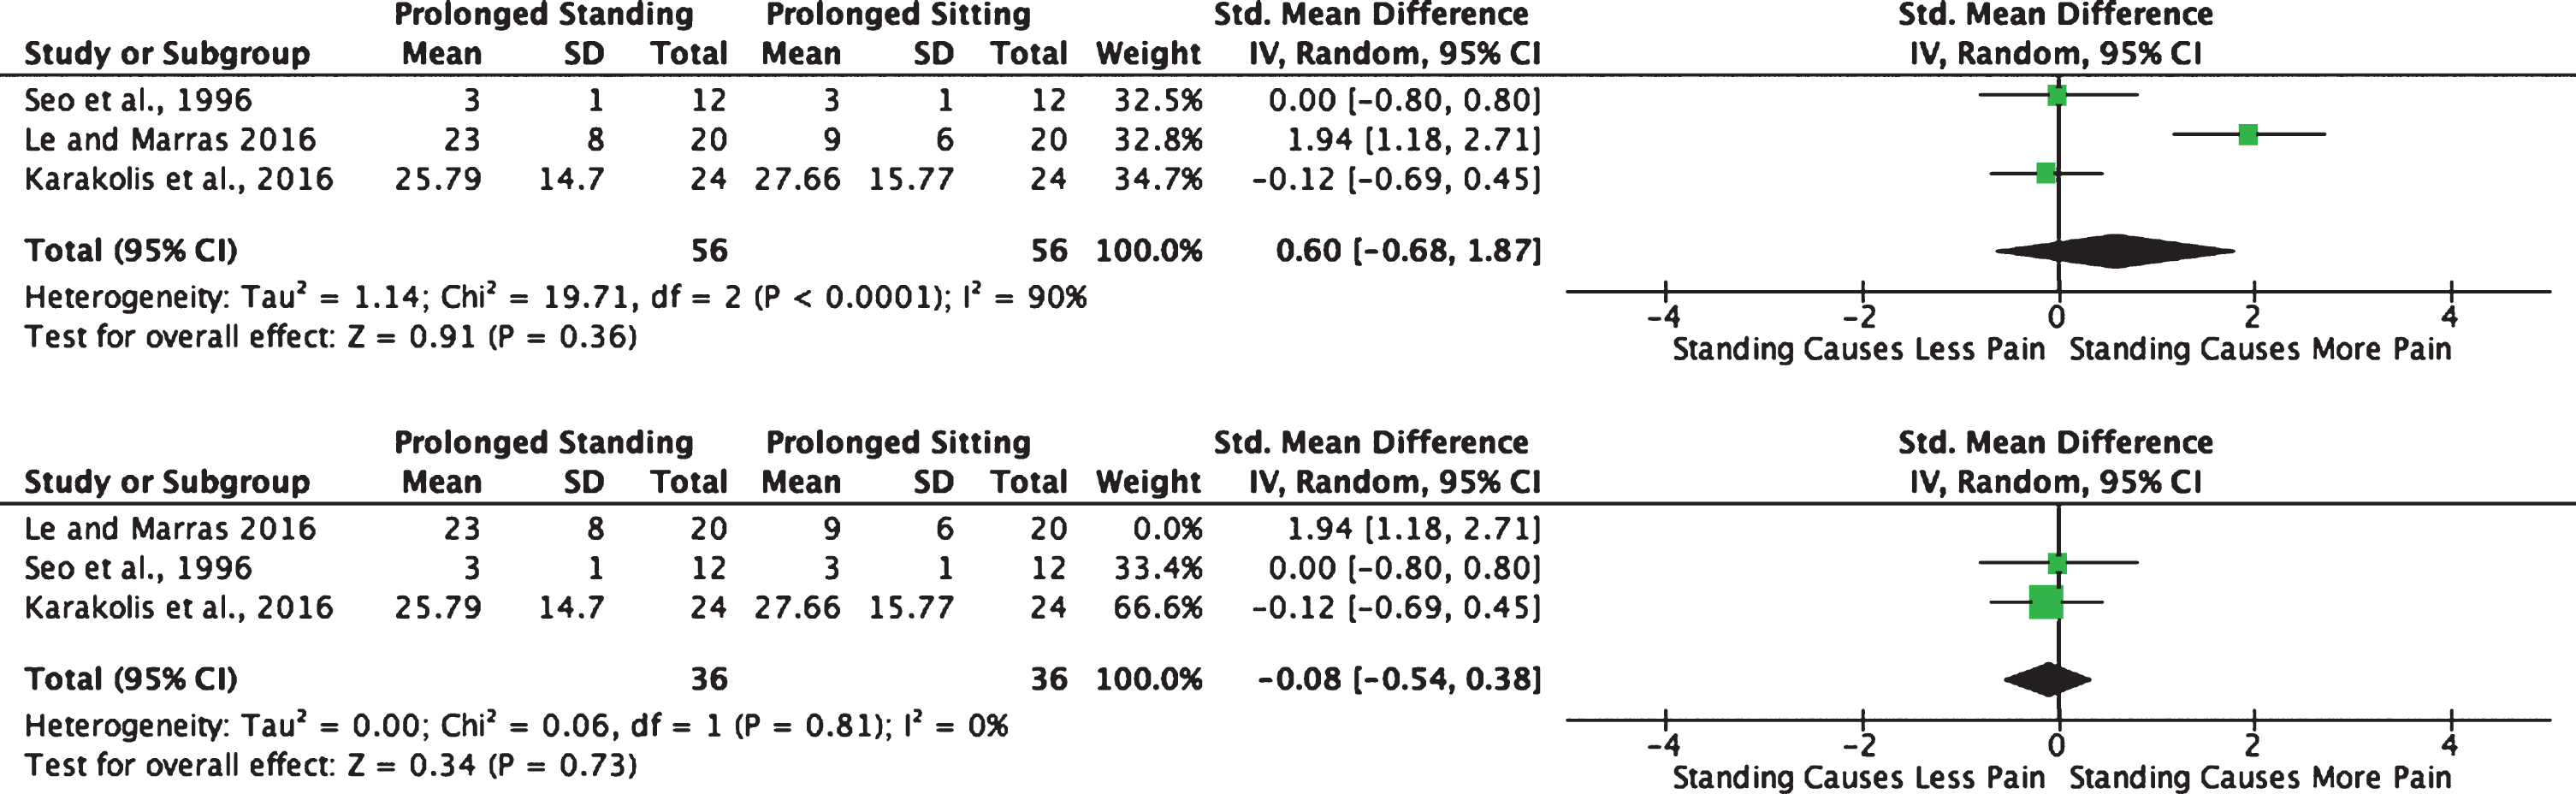 Top: Forest plot and measures of heterogeneity for perceived ratings of low back discomfort in laboratory-controlled and objectively measured conditions of prolonged standing versus prolonged sitting desk work postures in healthy adults for all three incldued studies. Bottom: Forest plot and measures of heterogeneity for perceived ratings of low back discomfort in laboratory-controlled and objectively measured conditions of prolonged standing versus prolonged sitting desk work postures in healthy adults with data for Le and Marras (2016) removed.